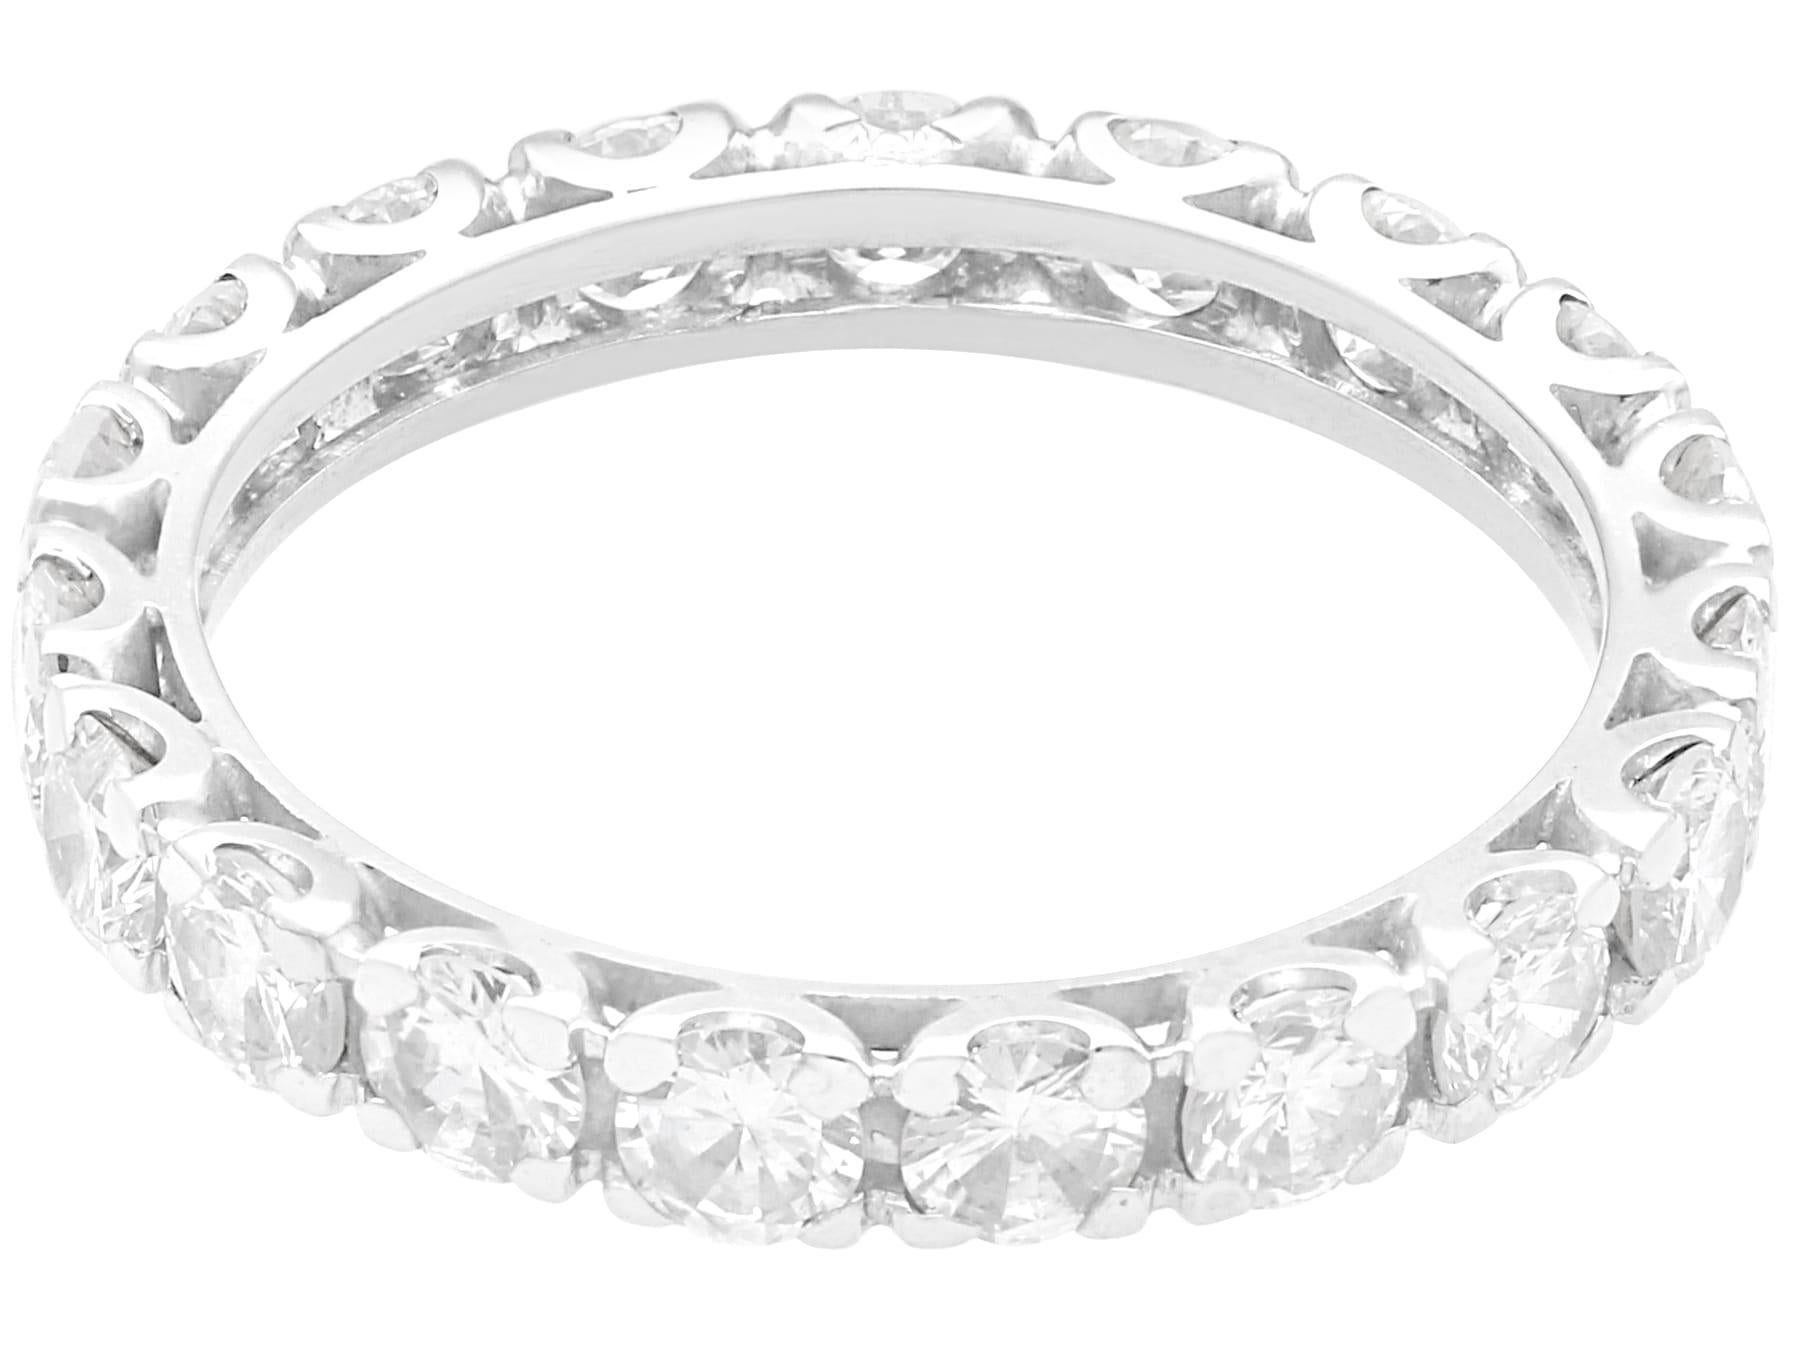 Vintage 1.90ct Diamond and 18k White Gold Full Eternity Ring Circa 1950 In Excellent Condition For Sale In Jesmond, Newcastle Upon Tyne